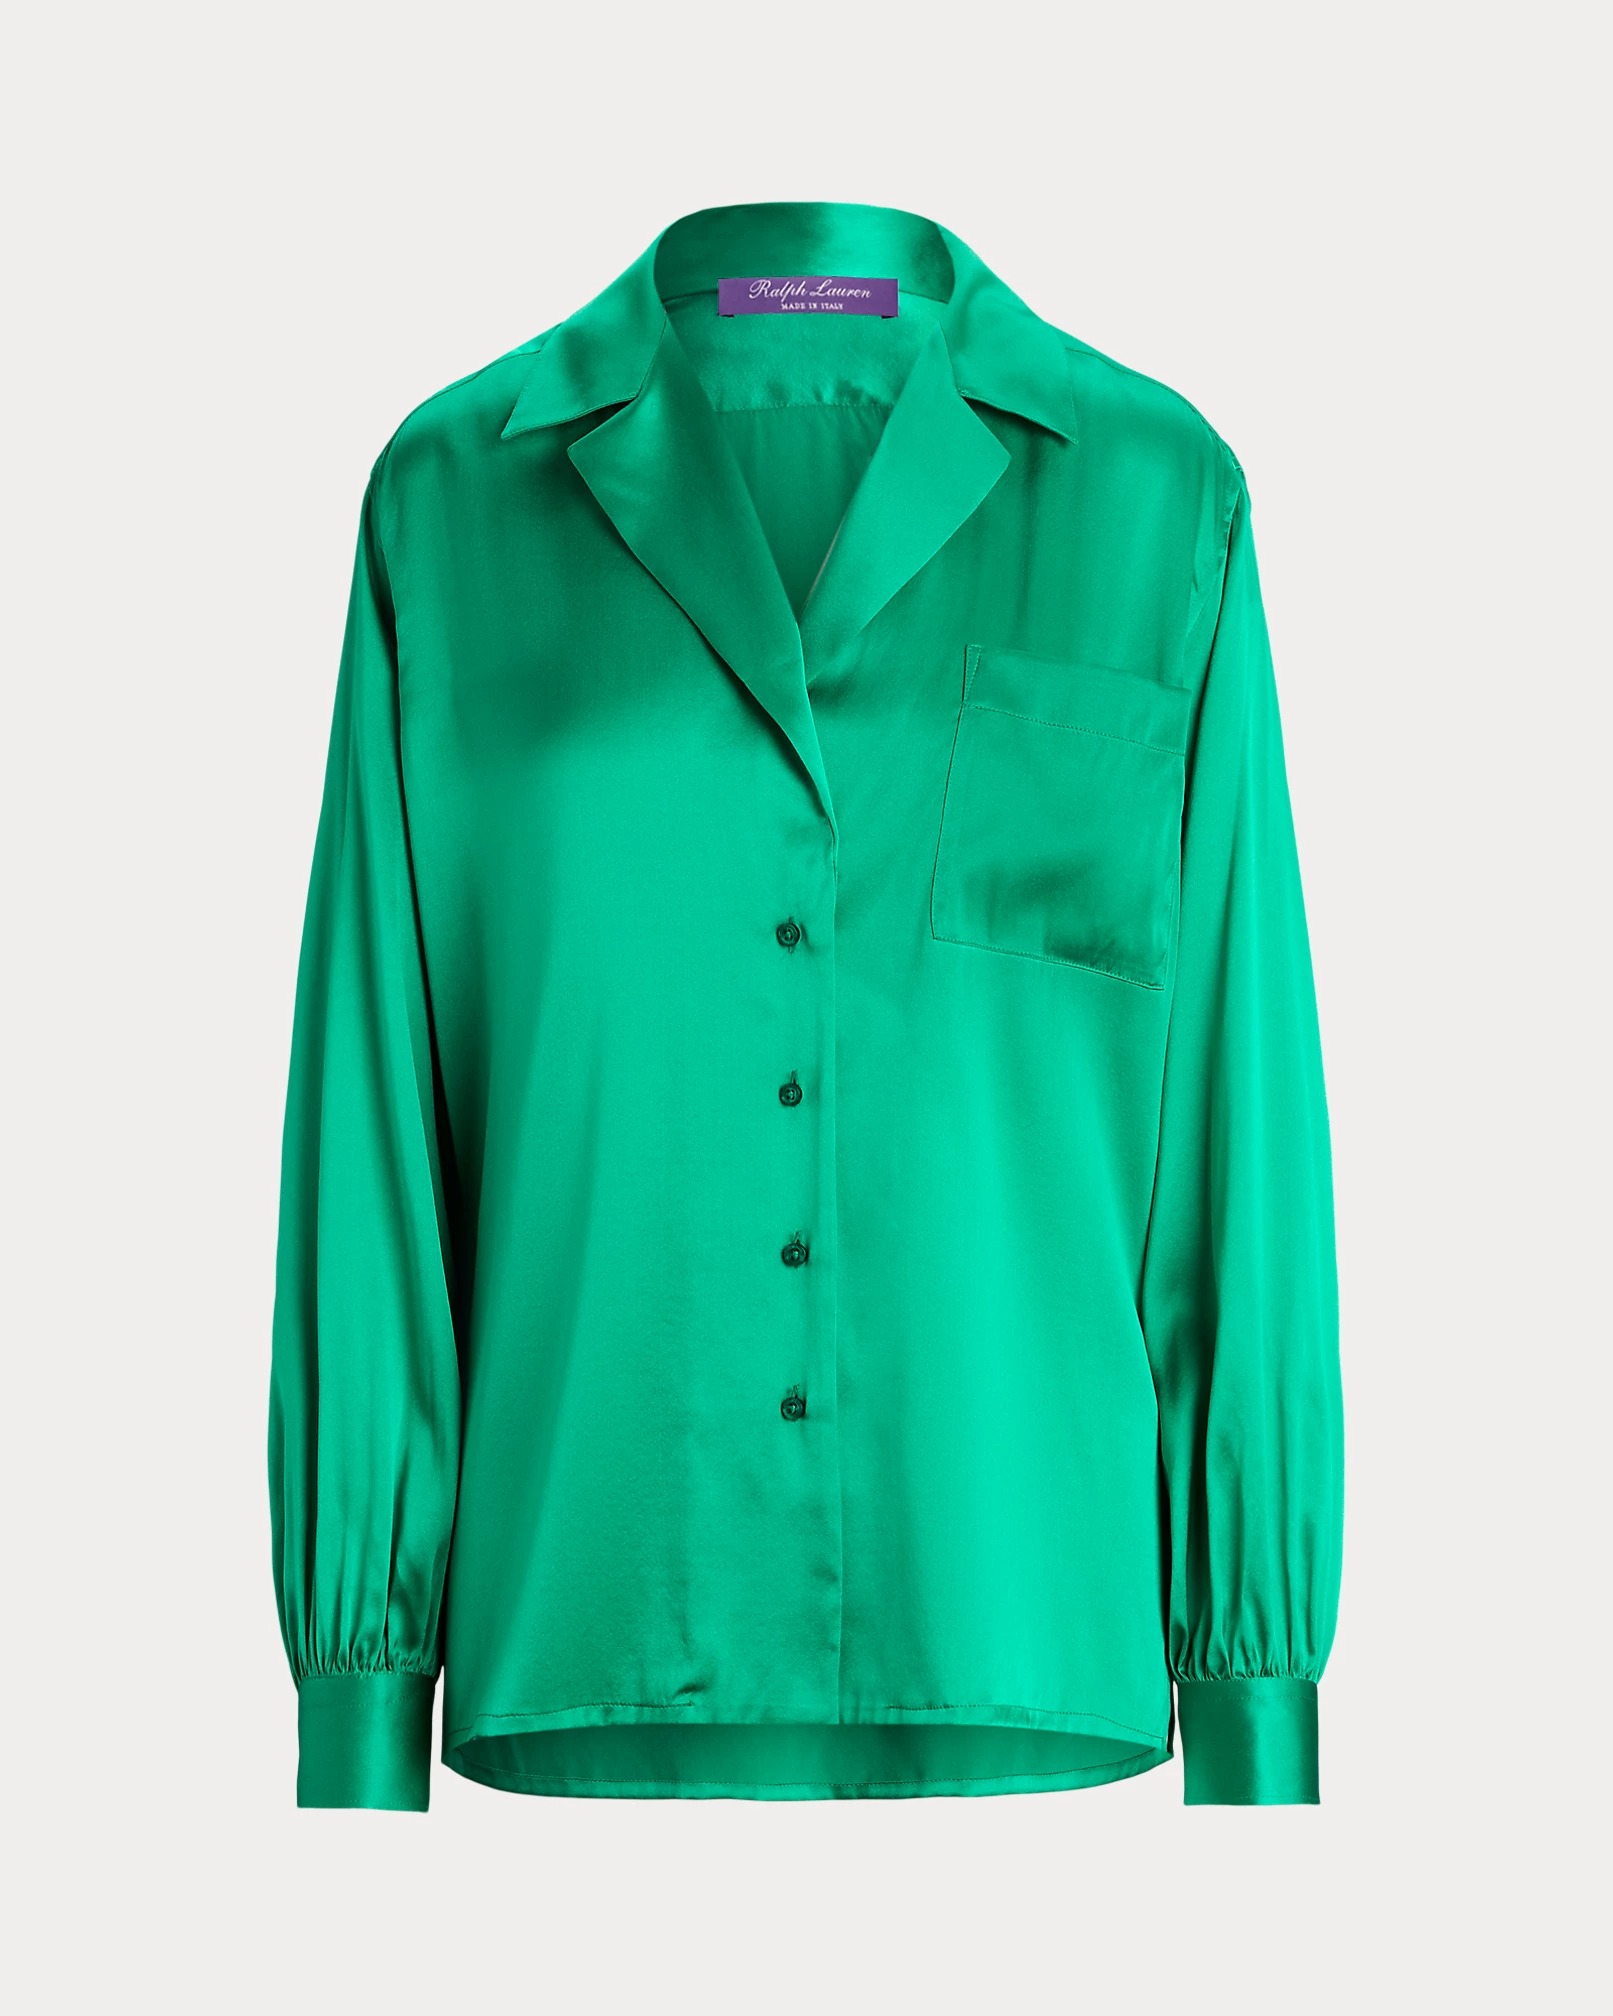 silky button-down collared shirt in bright green